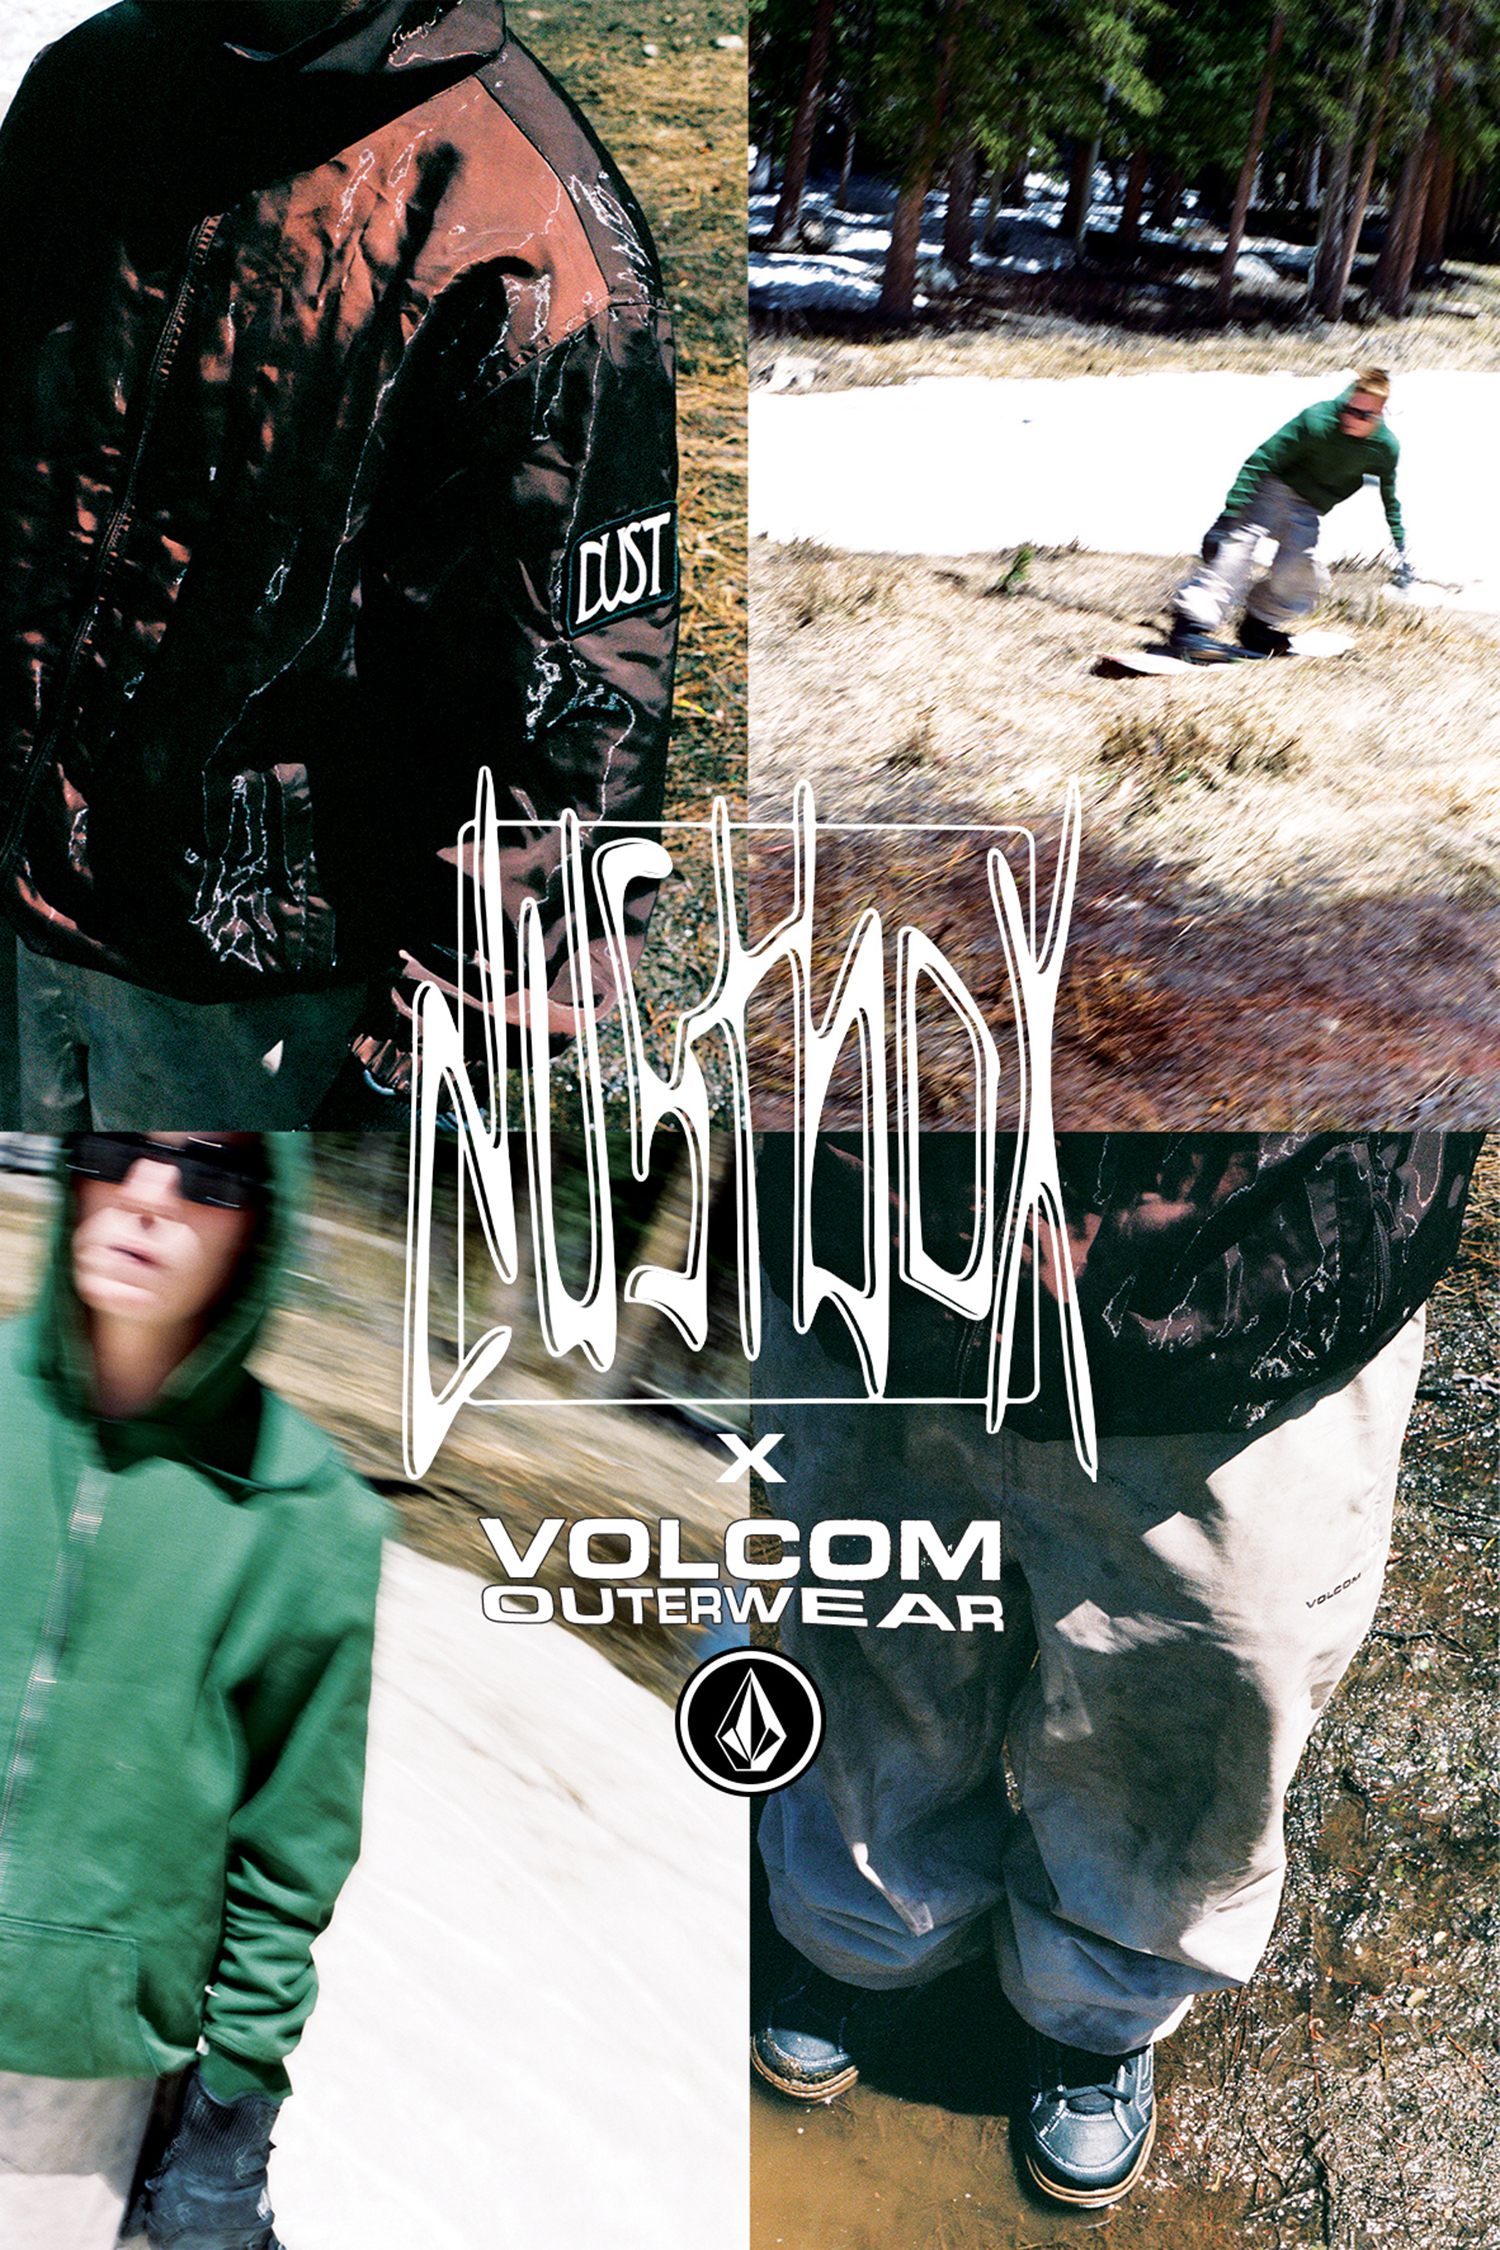 North American street crew DUSTBOX and VOLCOM's first